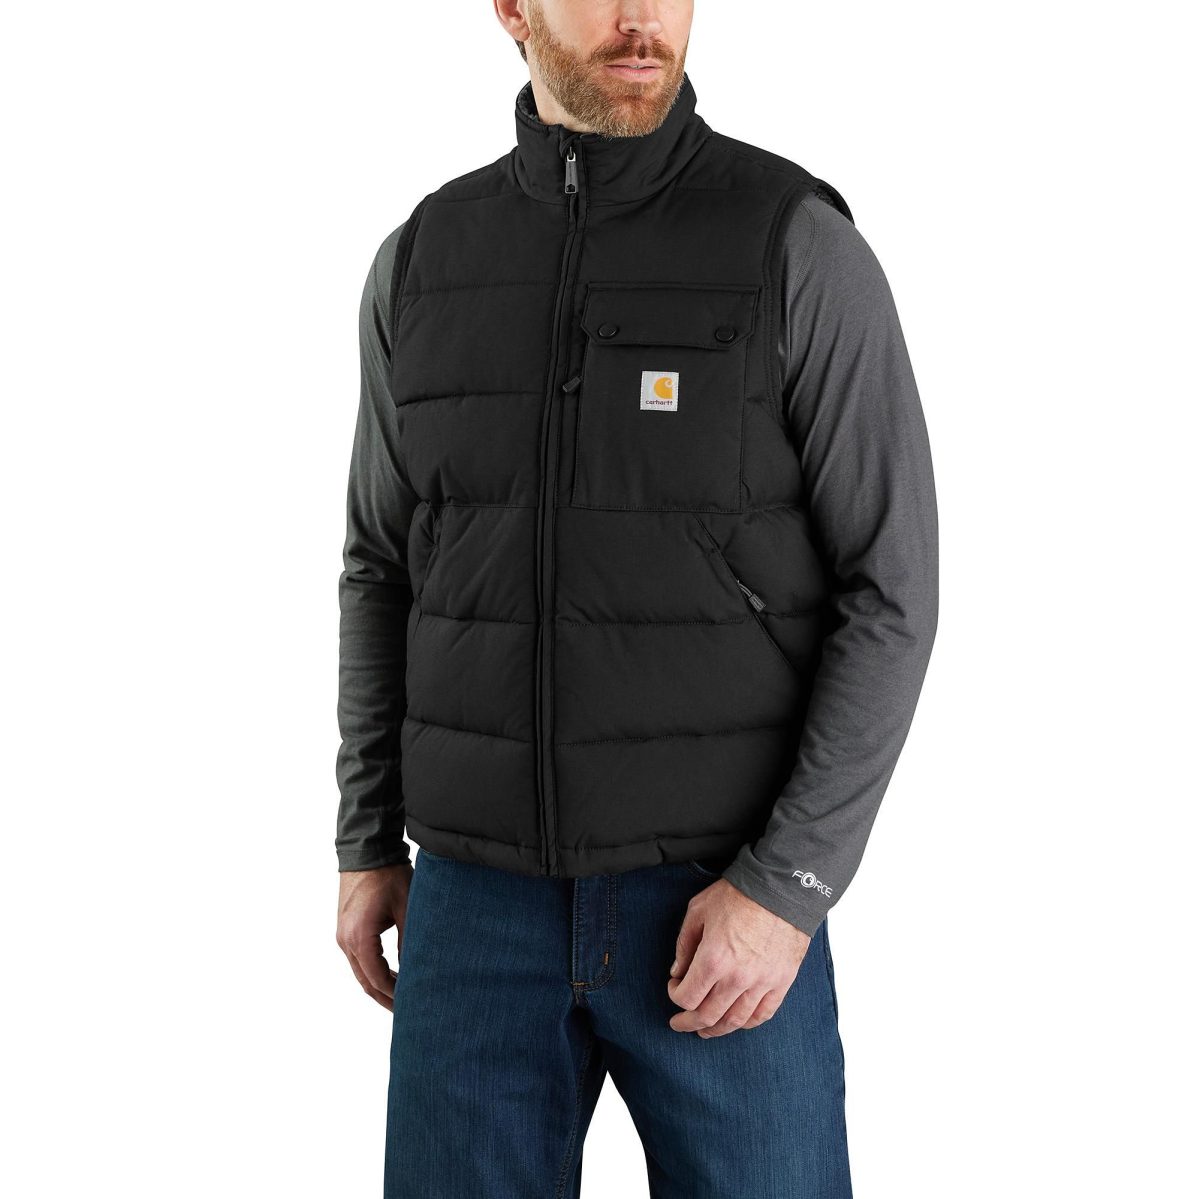 Carhartt Rain Defender Loose-Fit Midweight Insulated Vest for Men - Black - XL